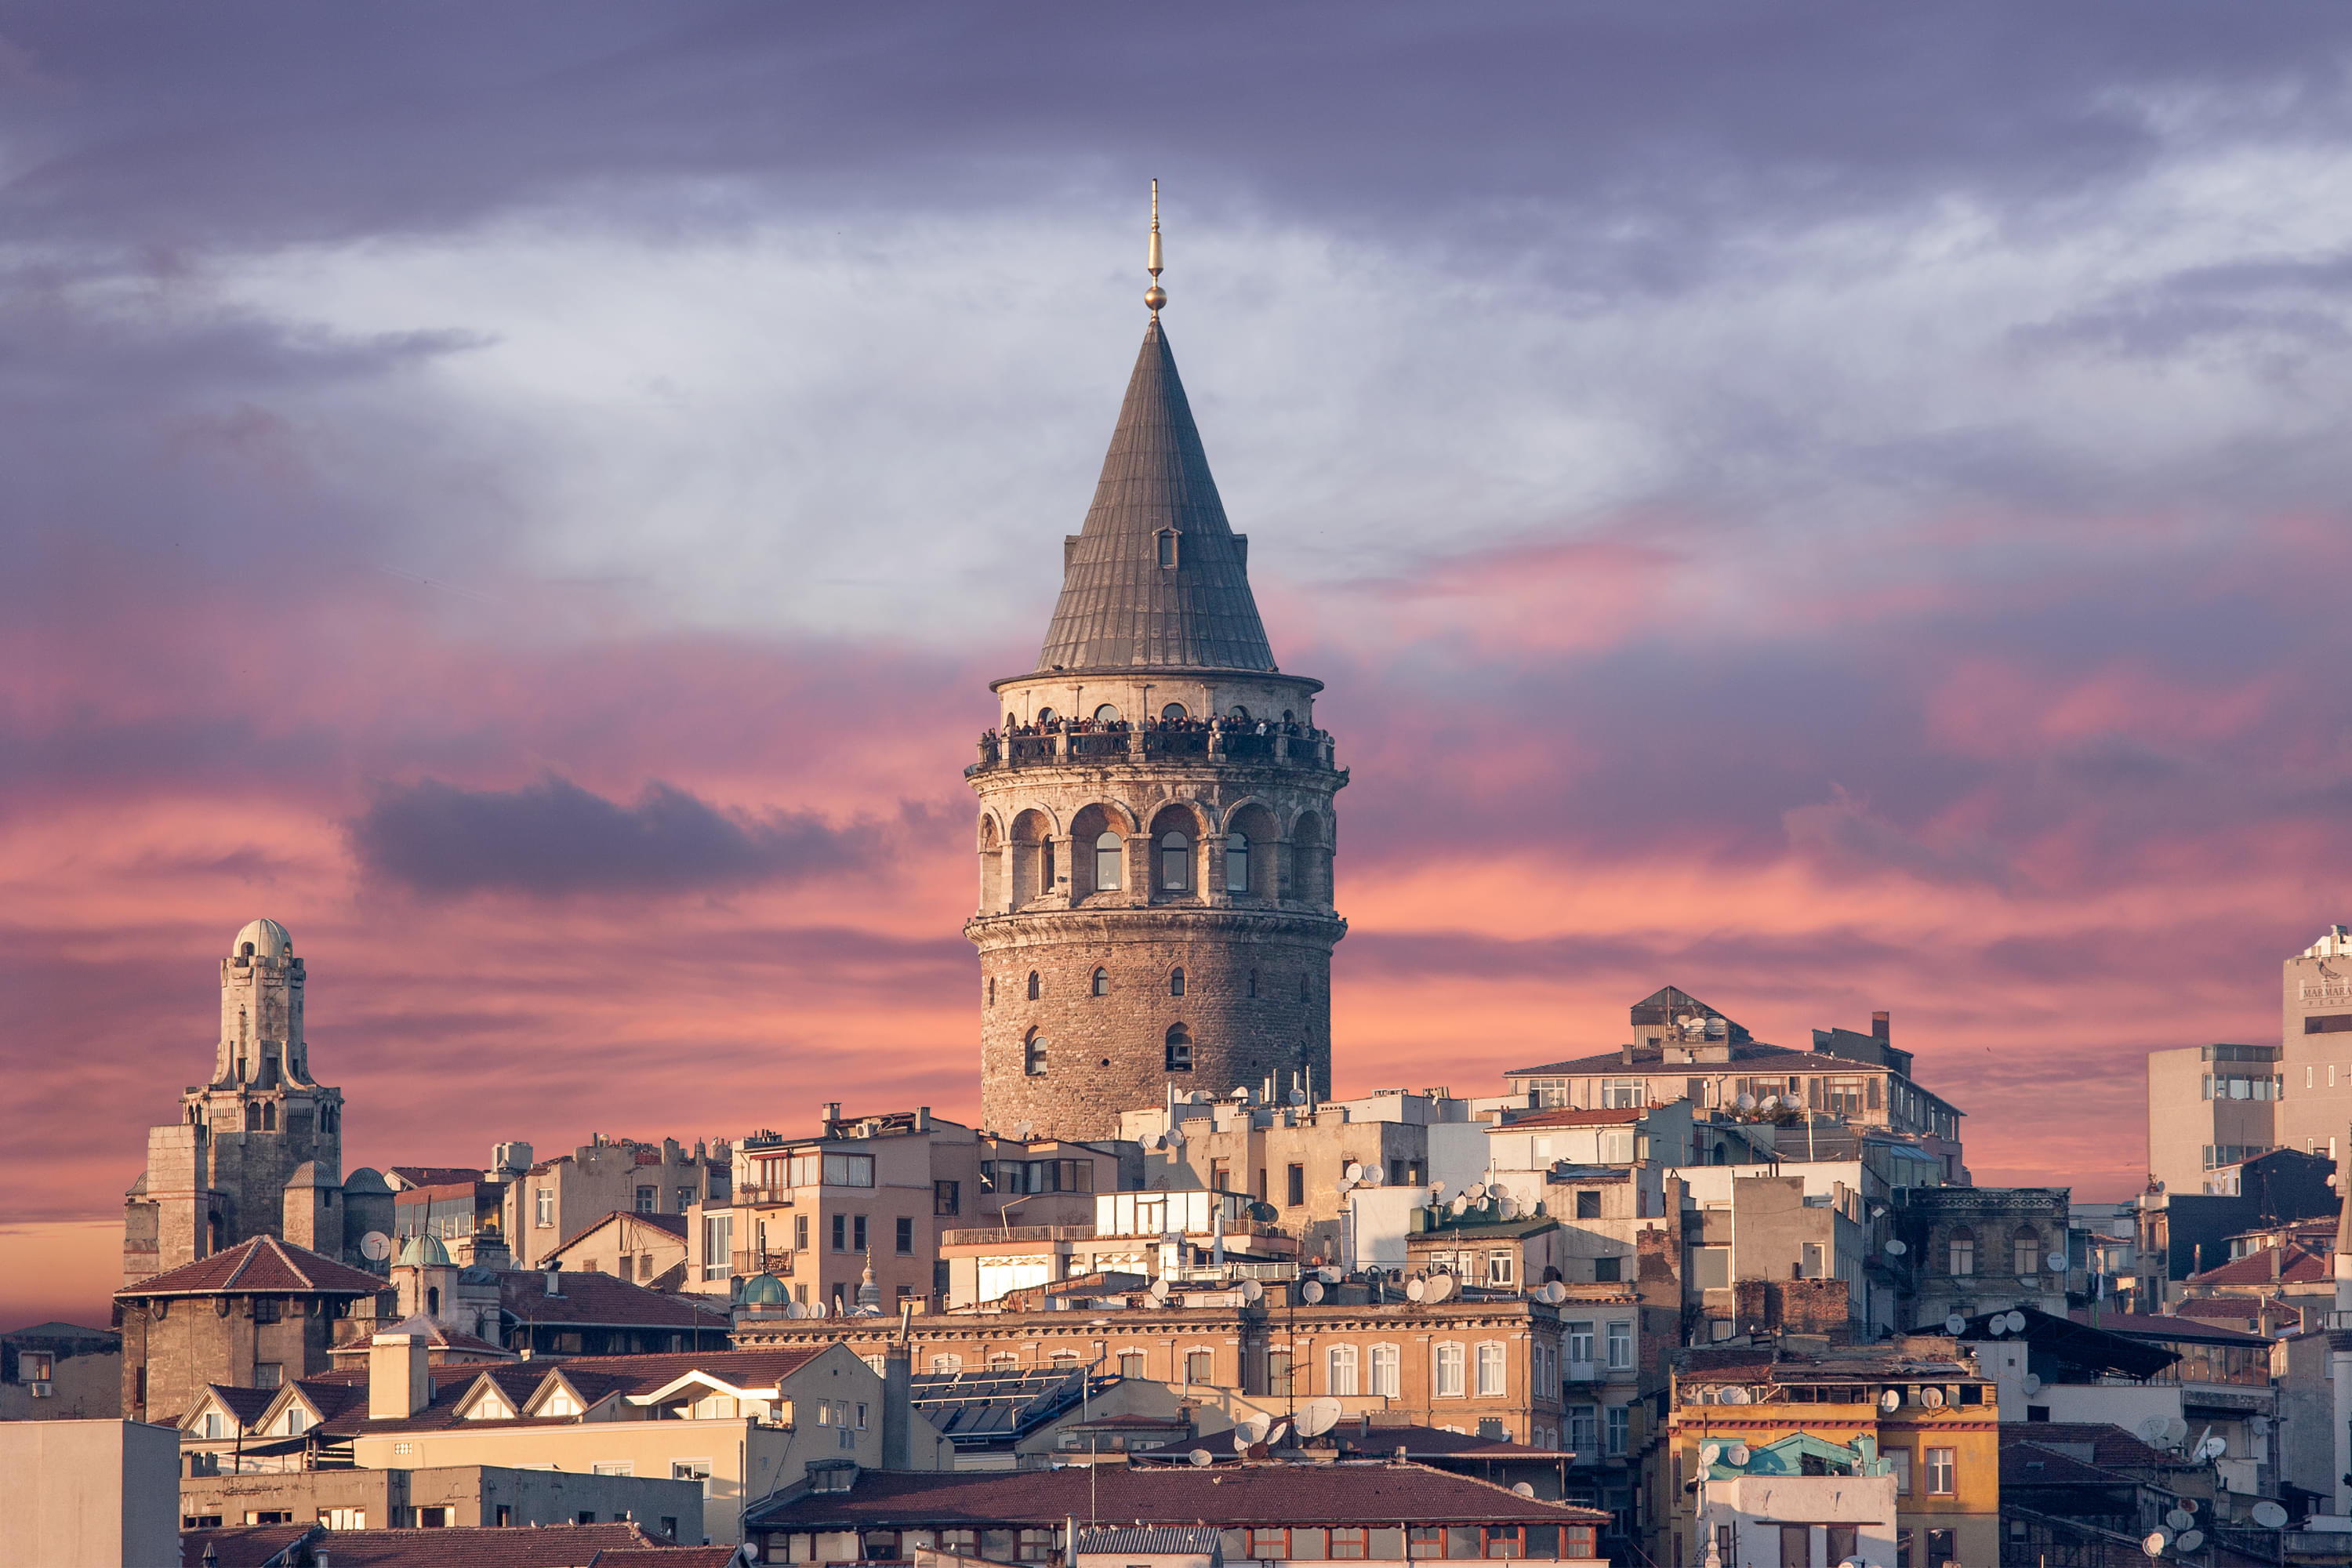 Tour the amazing Galata Tower Museum